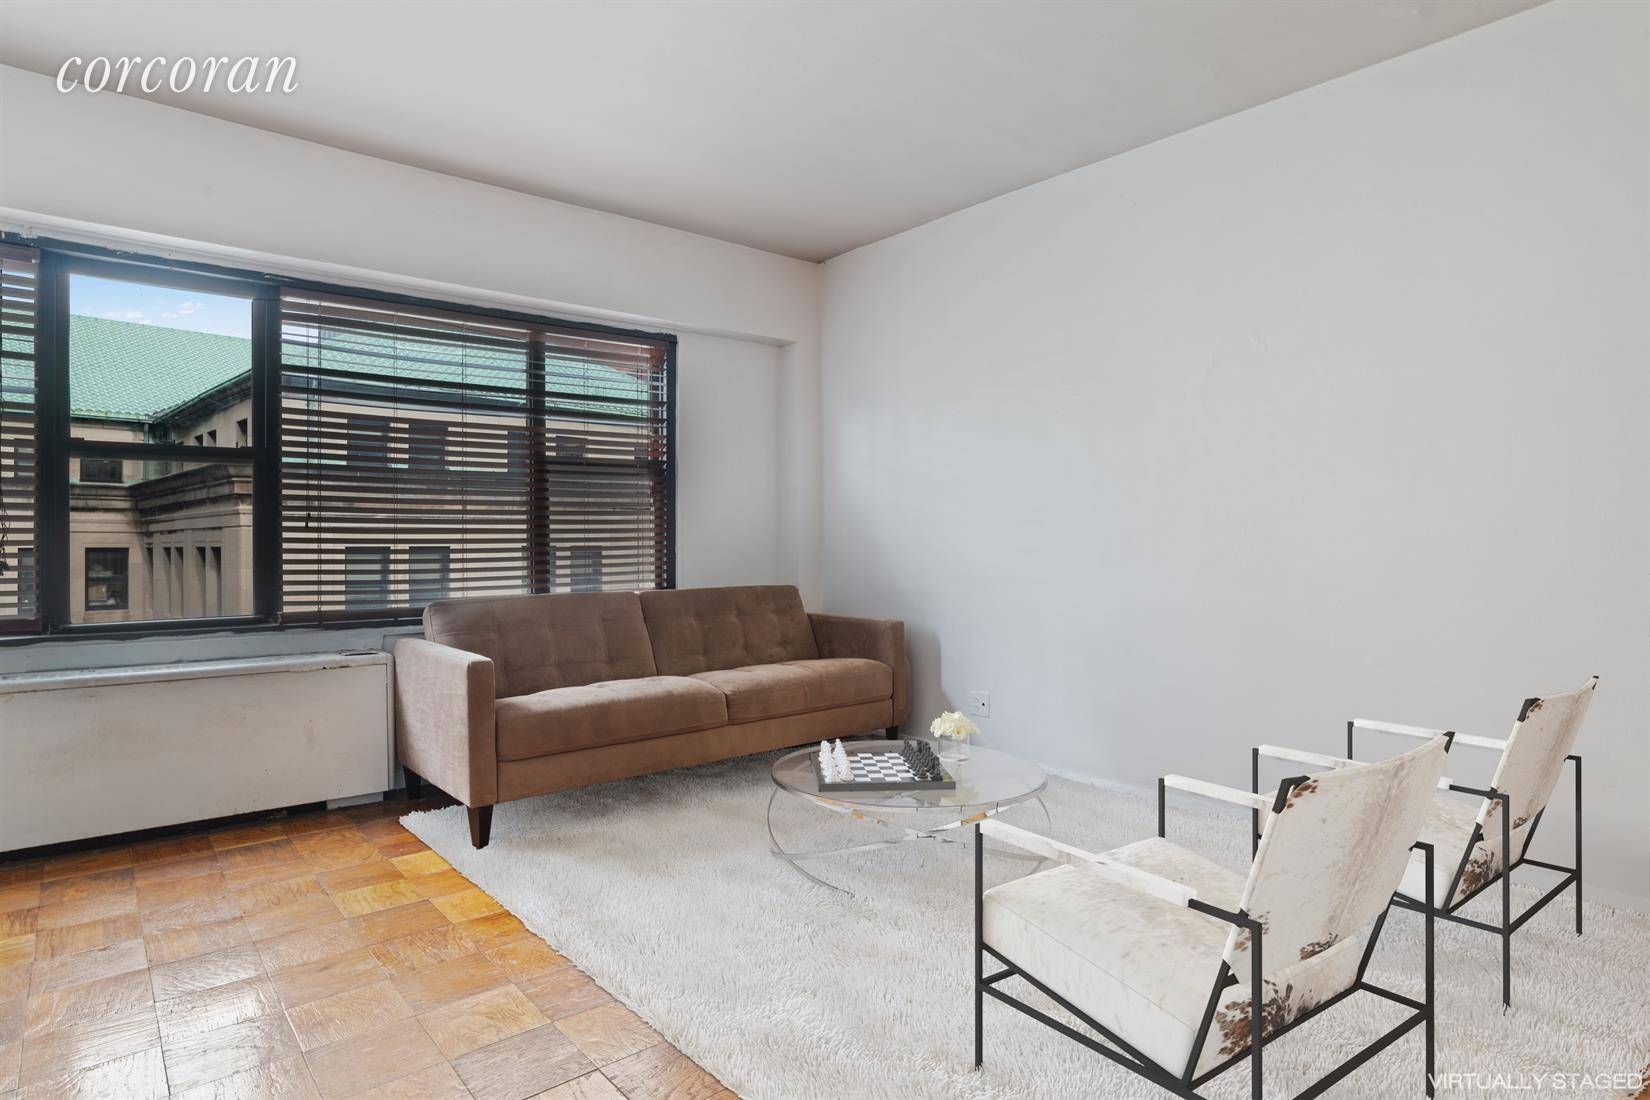 Unit 18B is a spacious alcove studio convertible junior one bedroom apartment in a full service doorman building in Brooklyn Heights Downtown.